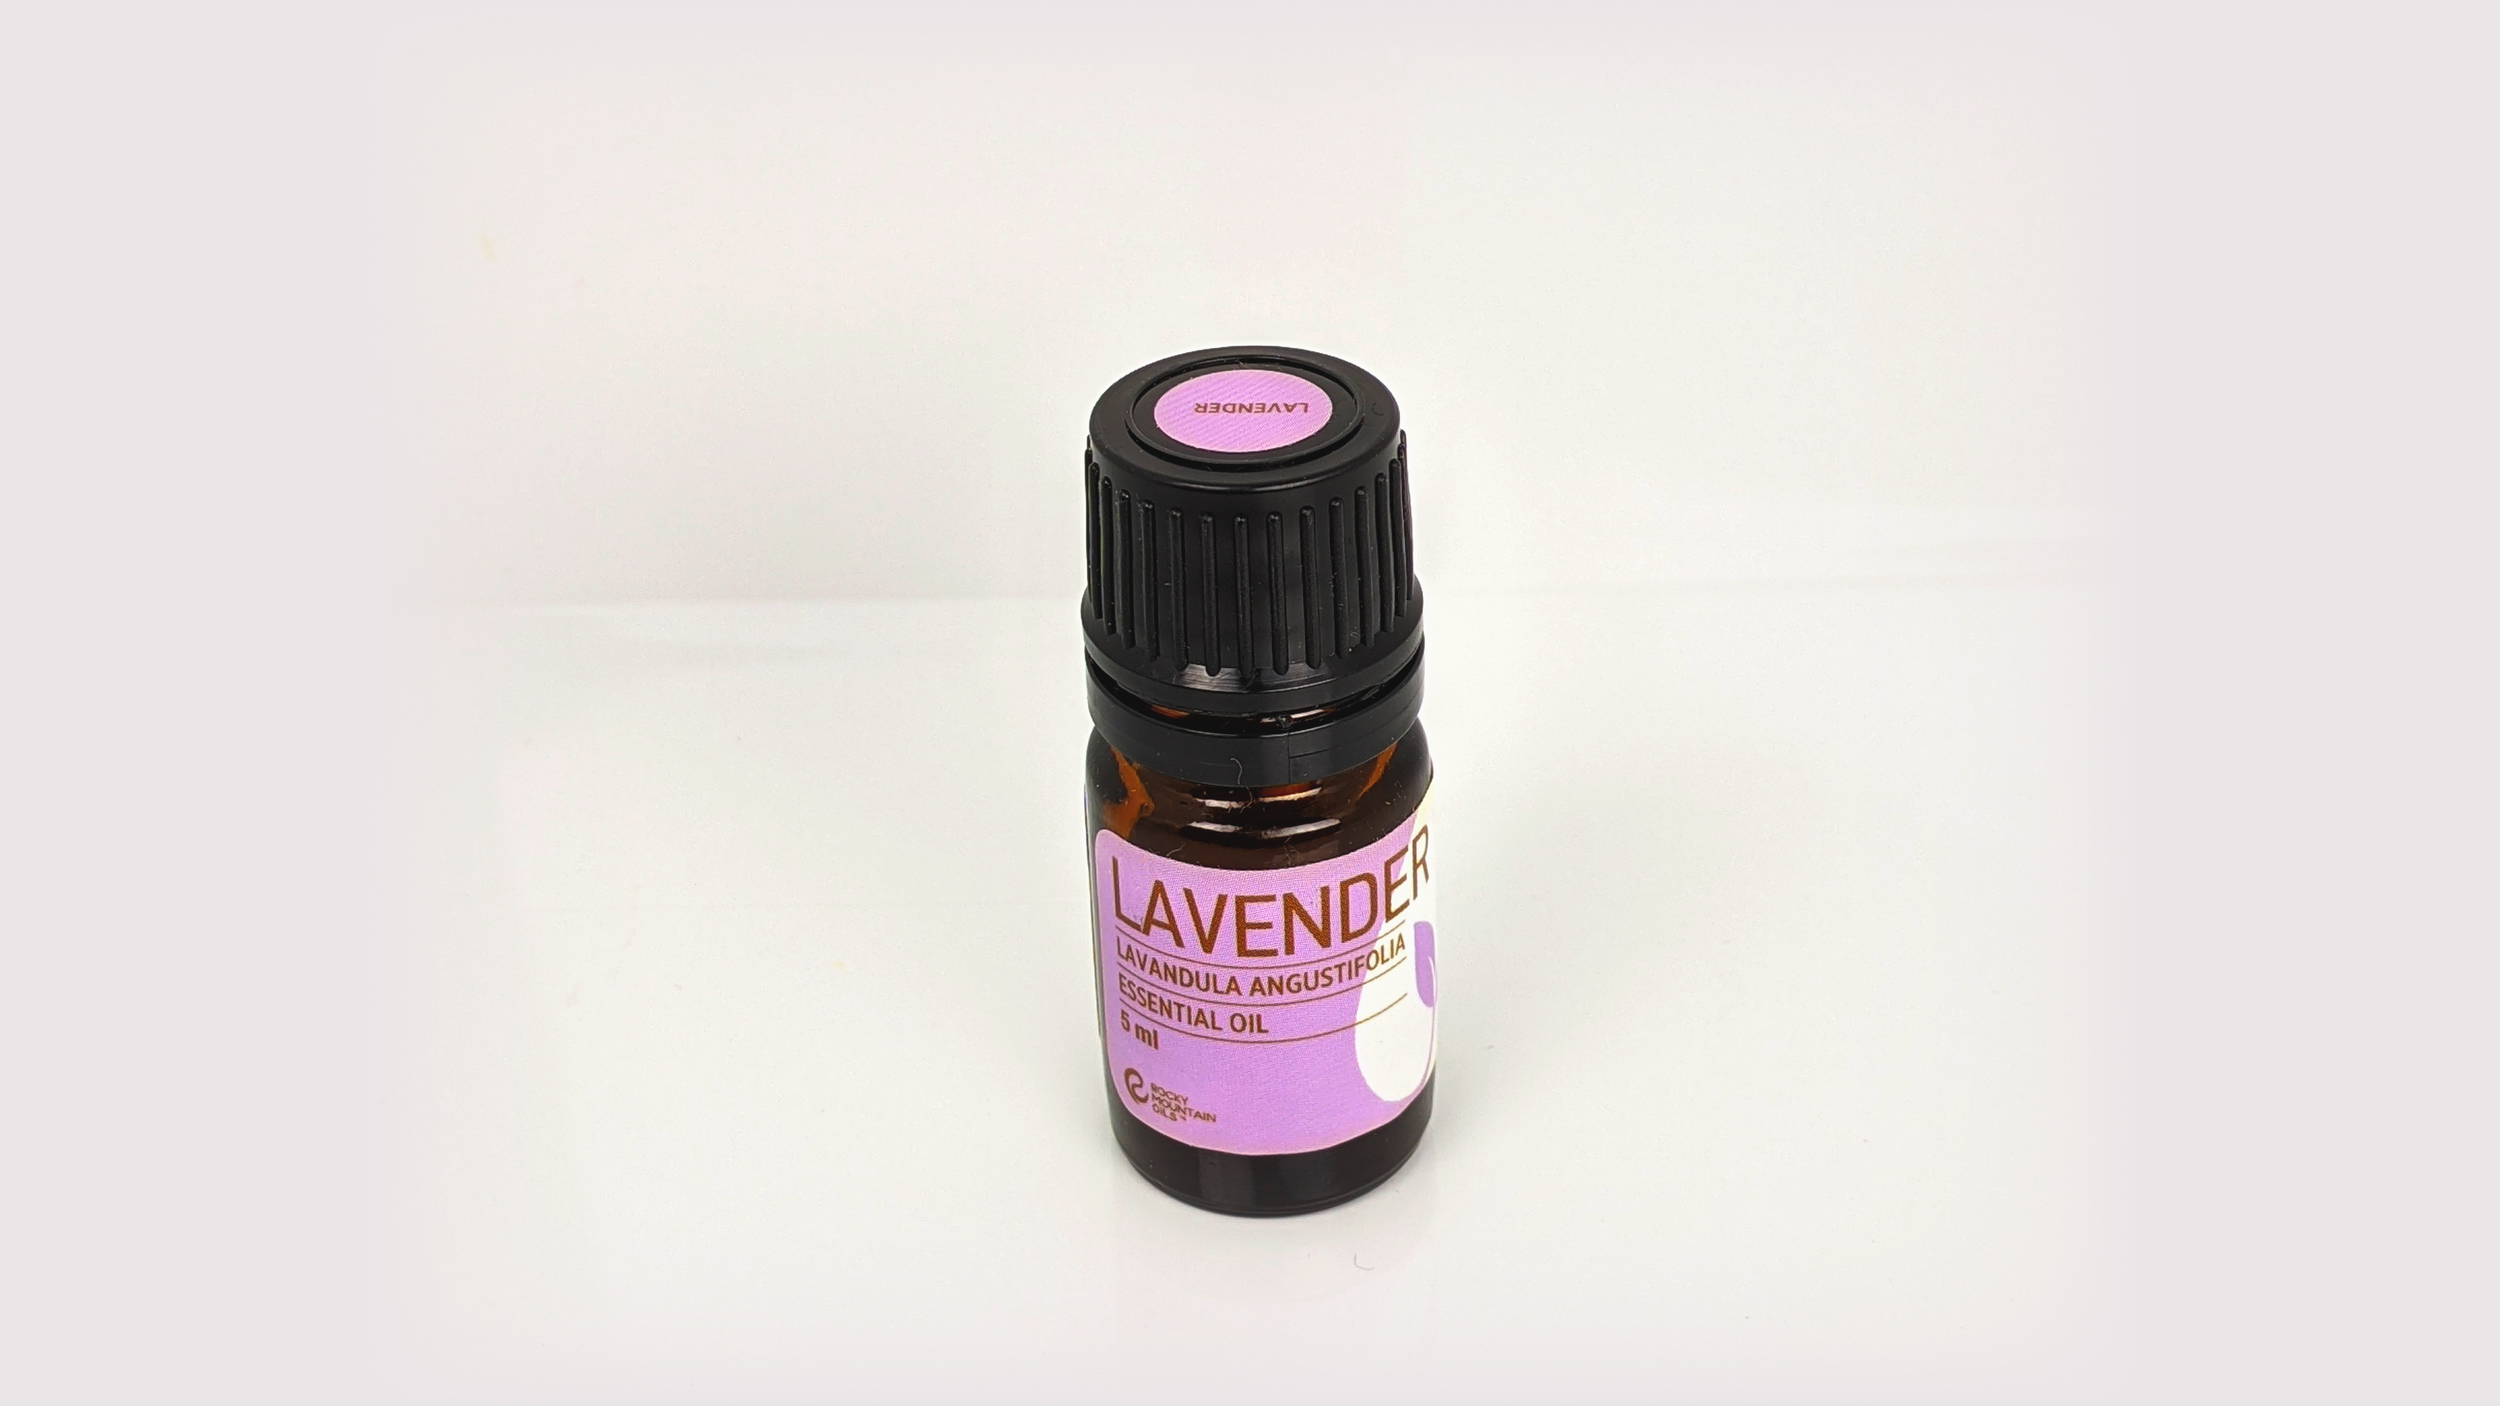 Lavender essential oil from  Rocky Mountain Oils  is my favorite for skincare because it leaves skin bright and glowing.